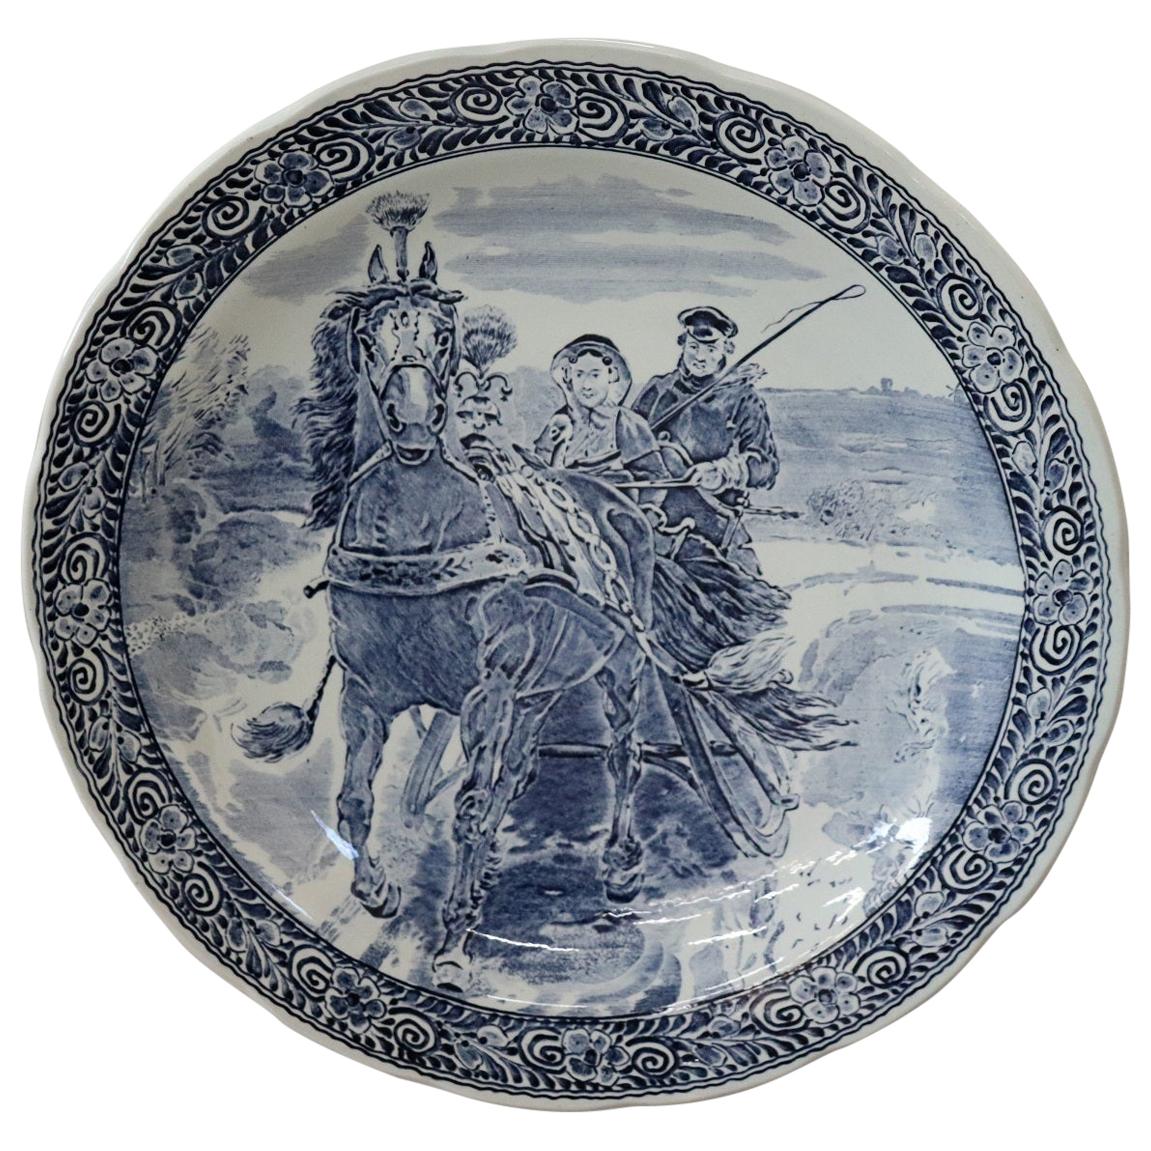 Vintage circa 1950s Large Royal Delft Boch Blue and White Wall Charger Plate